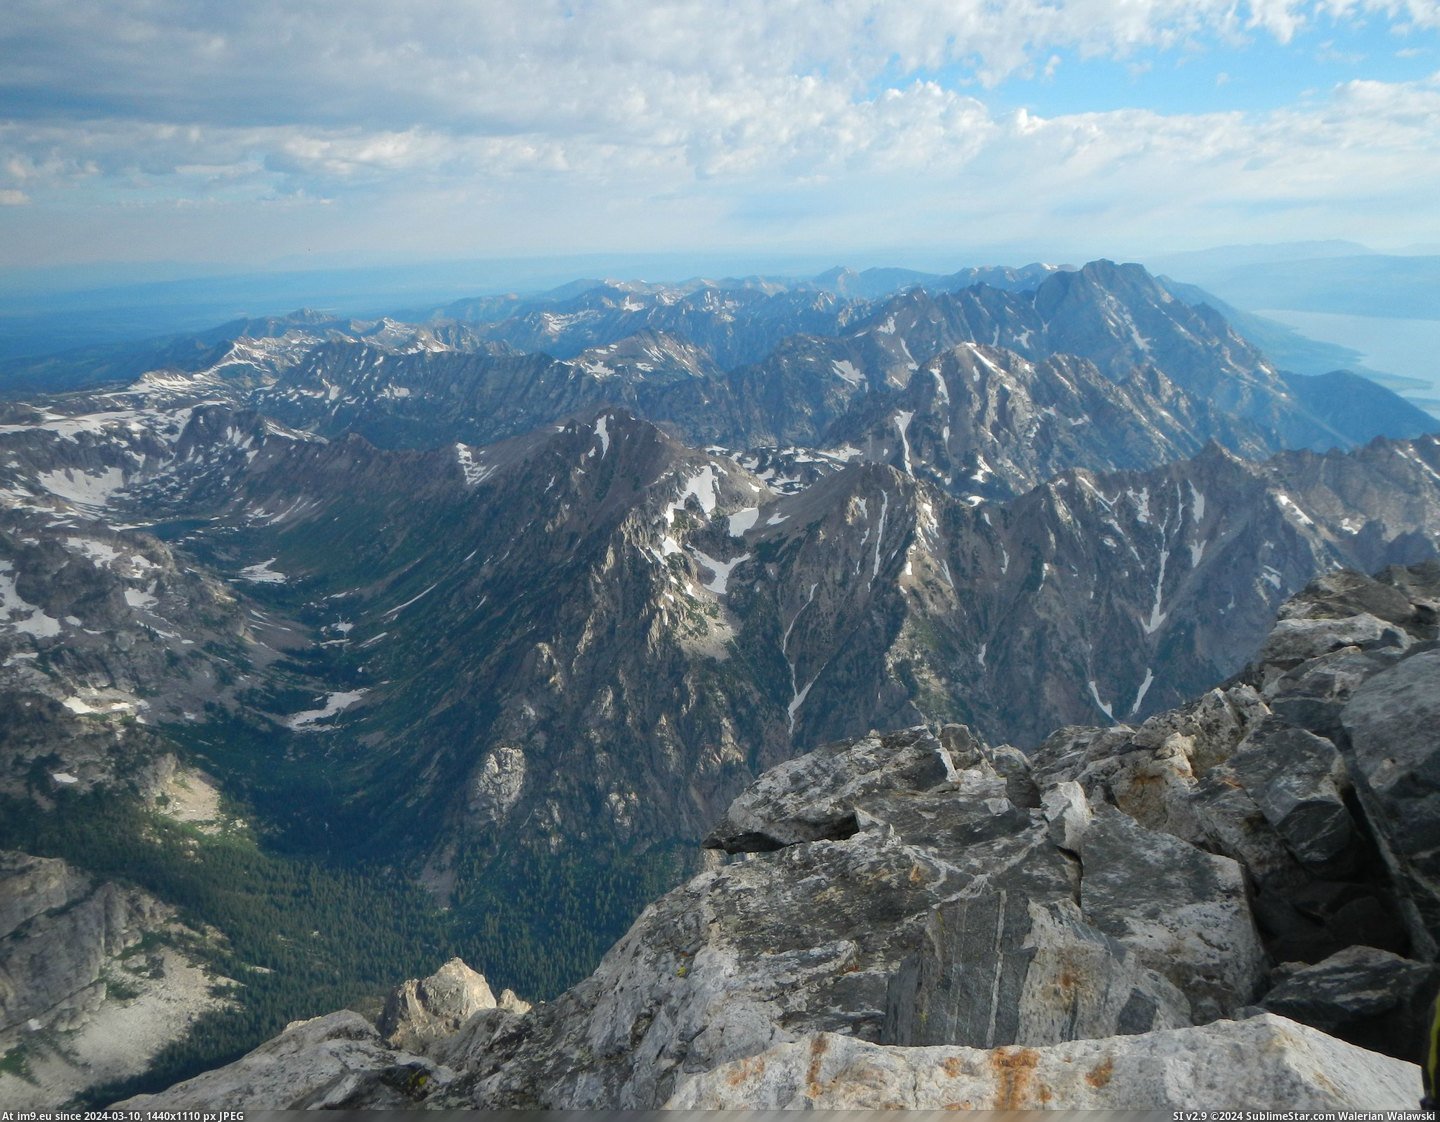 #Canyon #Grand #Worth #Cascade #Viewed #Pain #Summit #Teton [Earthporn] The view was worth the pain. Cascade Canyon as viewed from the summit of the Grand Teton 2674x2073 [OC] Pic. (Image of album My r/EARTHPORN favs))